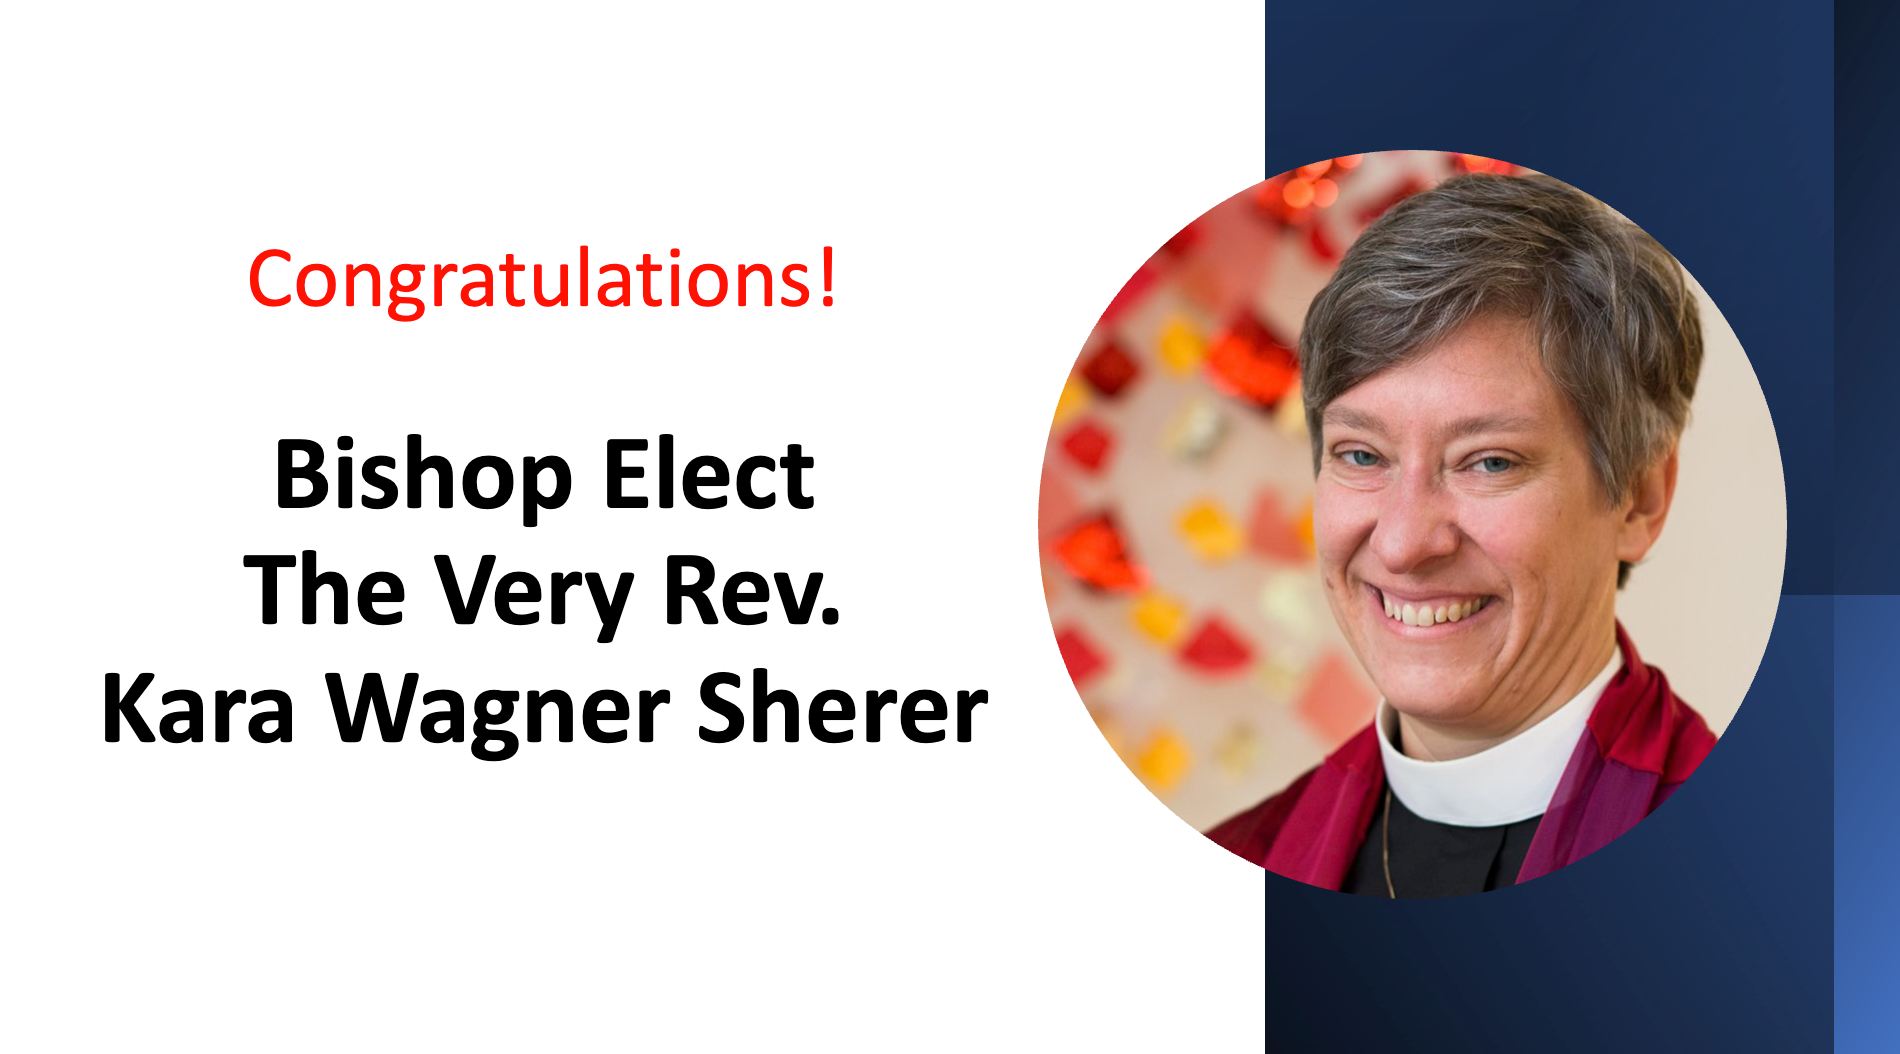 Photograph of The Very Rev. Kara Wagner Sherer.  The text in the image says "Congratulations! Bishop Elect The Very Rev. Kara Wagner Sherer."